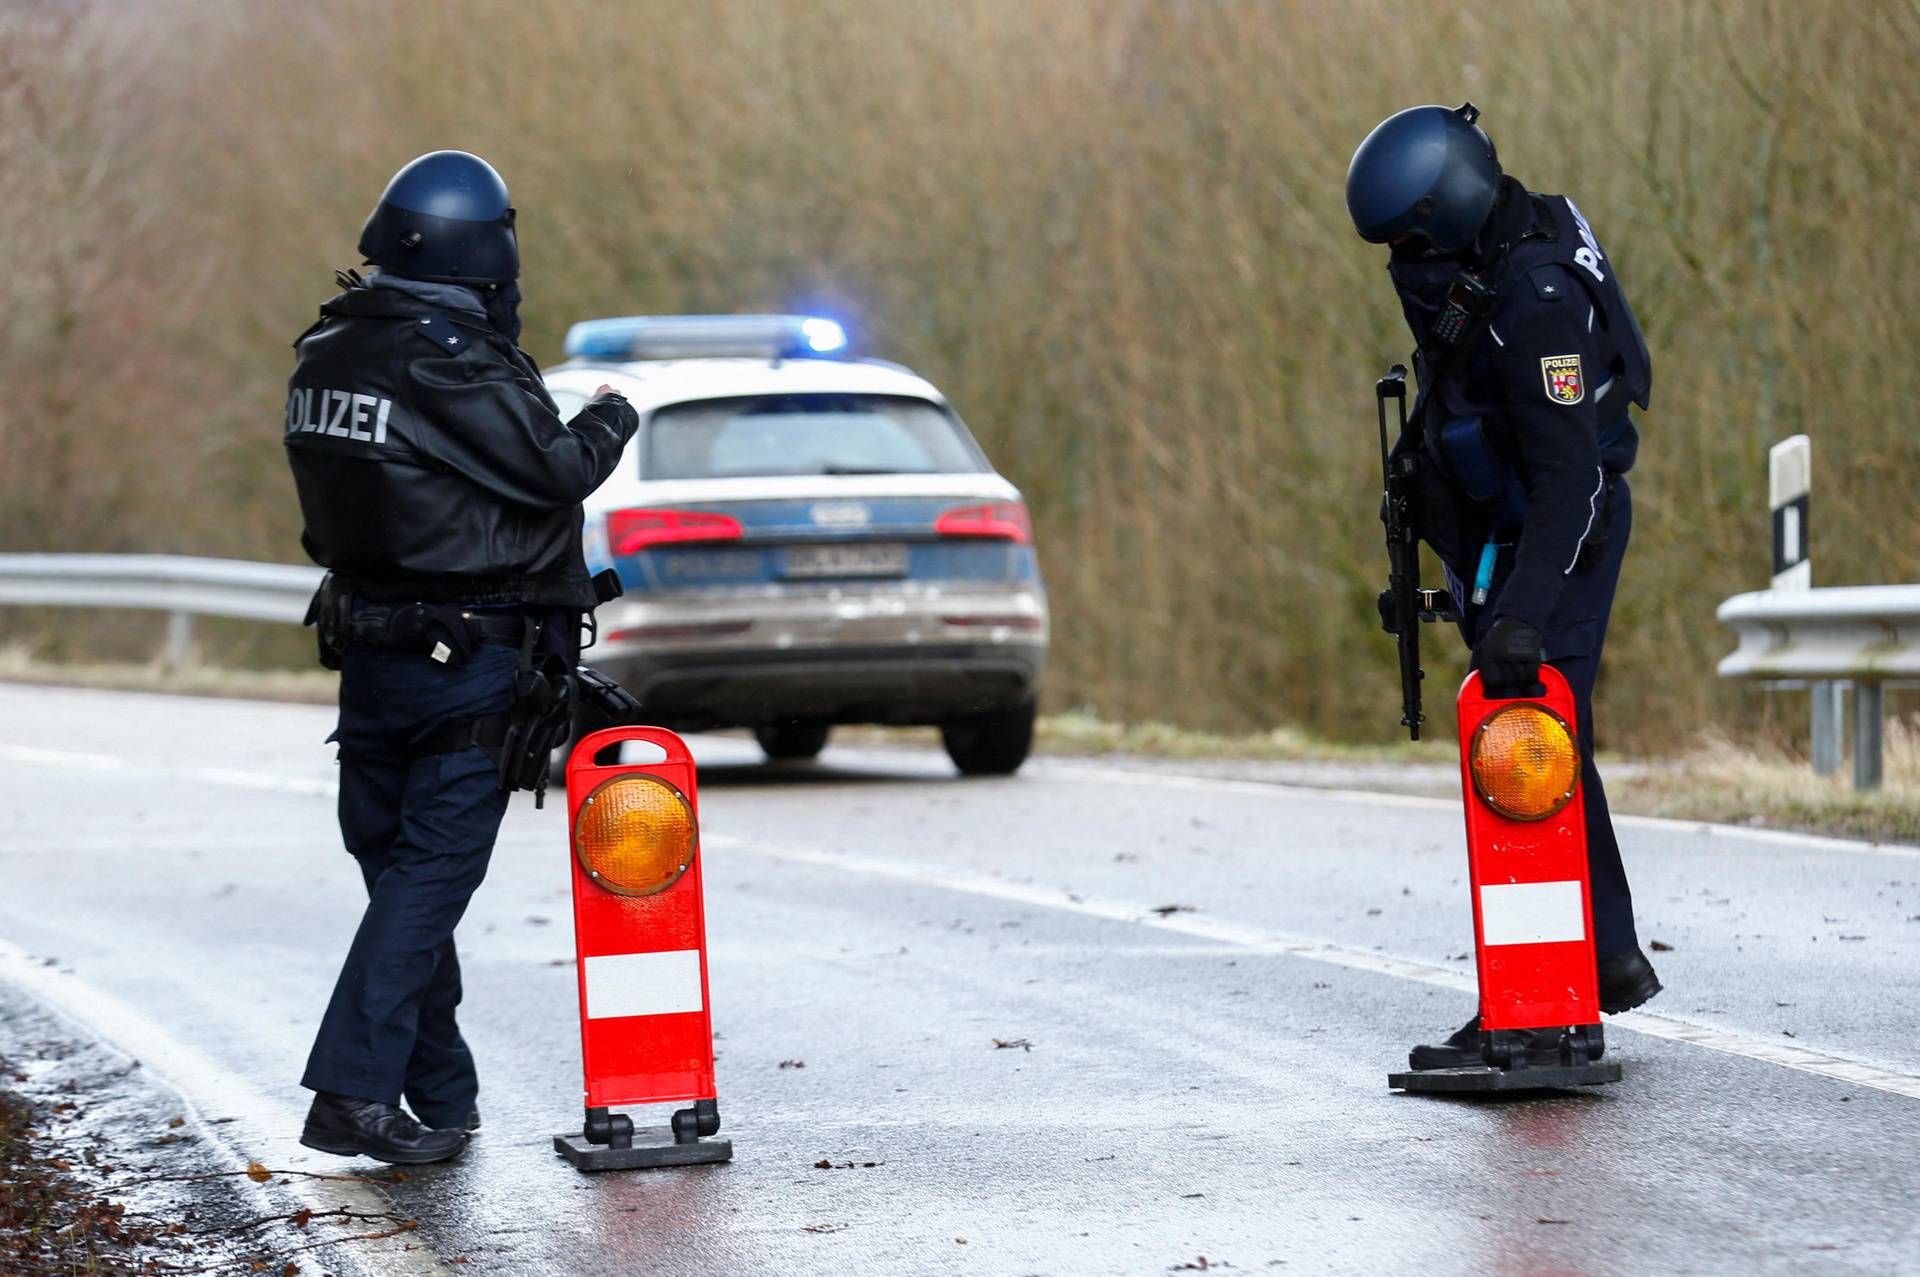 Two German police officers killed during routine traffic stop near Kusel